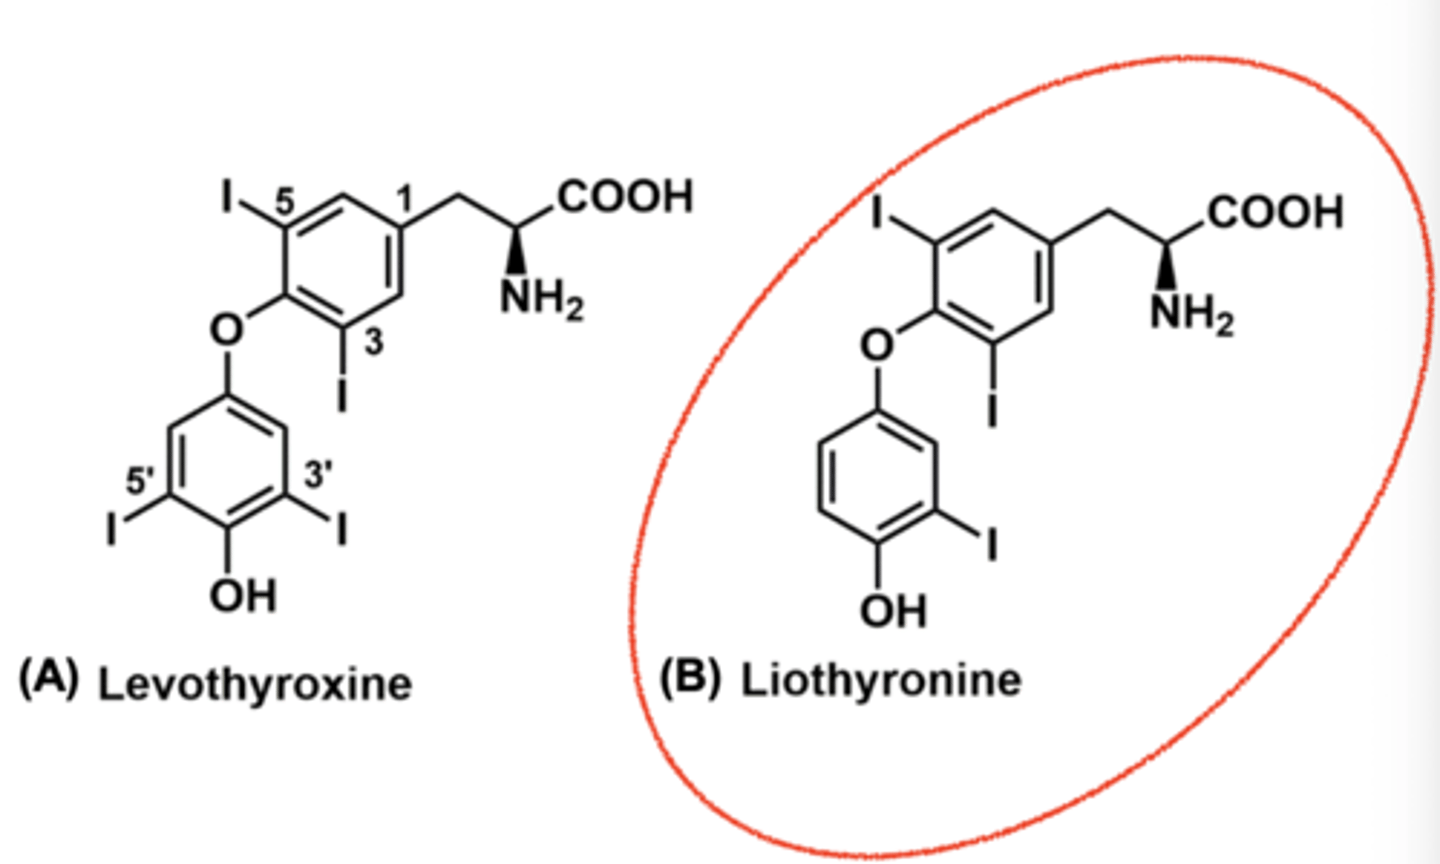 <p>The more ionized one is water soluble so it cannot cross over as easily and bind - This is levothyroxine</p><p>Liothyronine is missing the one iodine so it is much less ionized and can more easily cross over and bind TBG - giving it a faster onset of action</p>